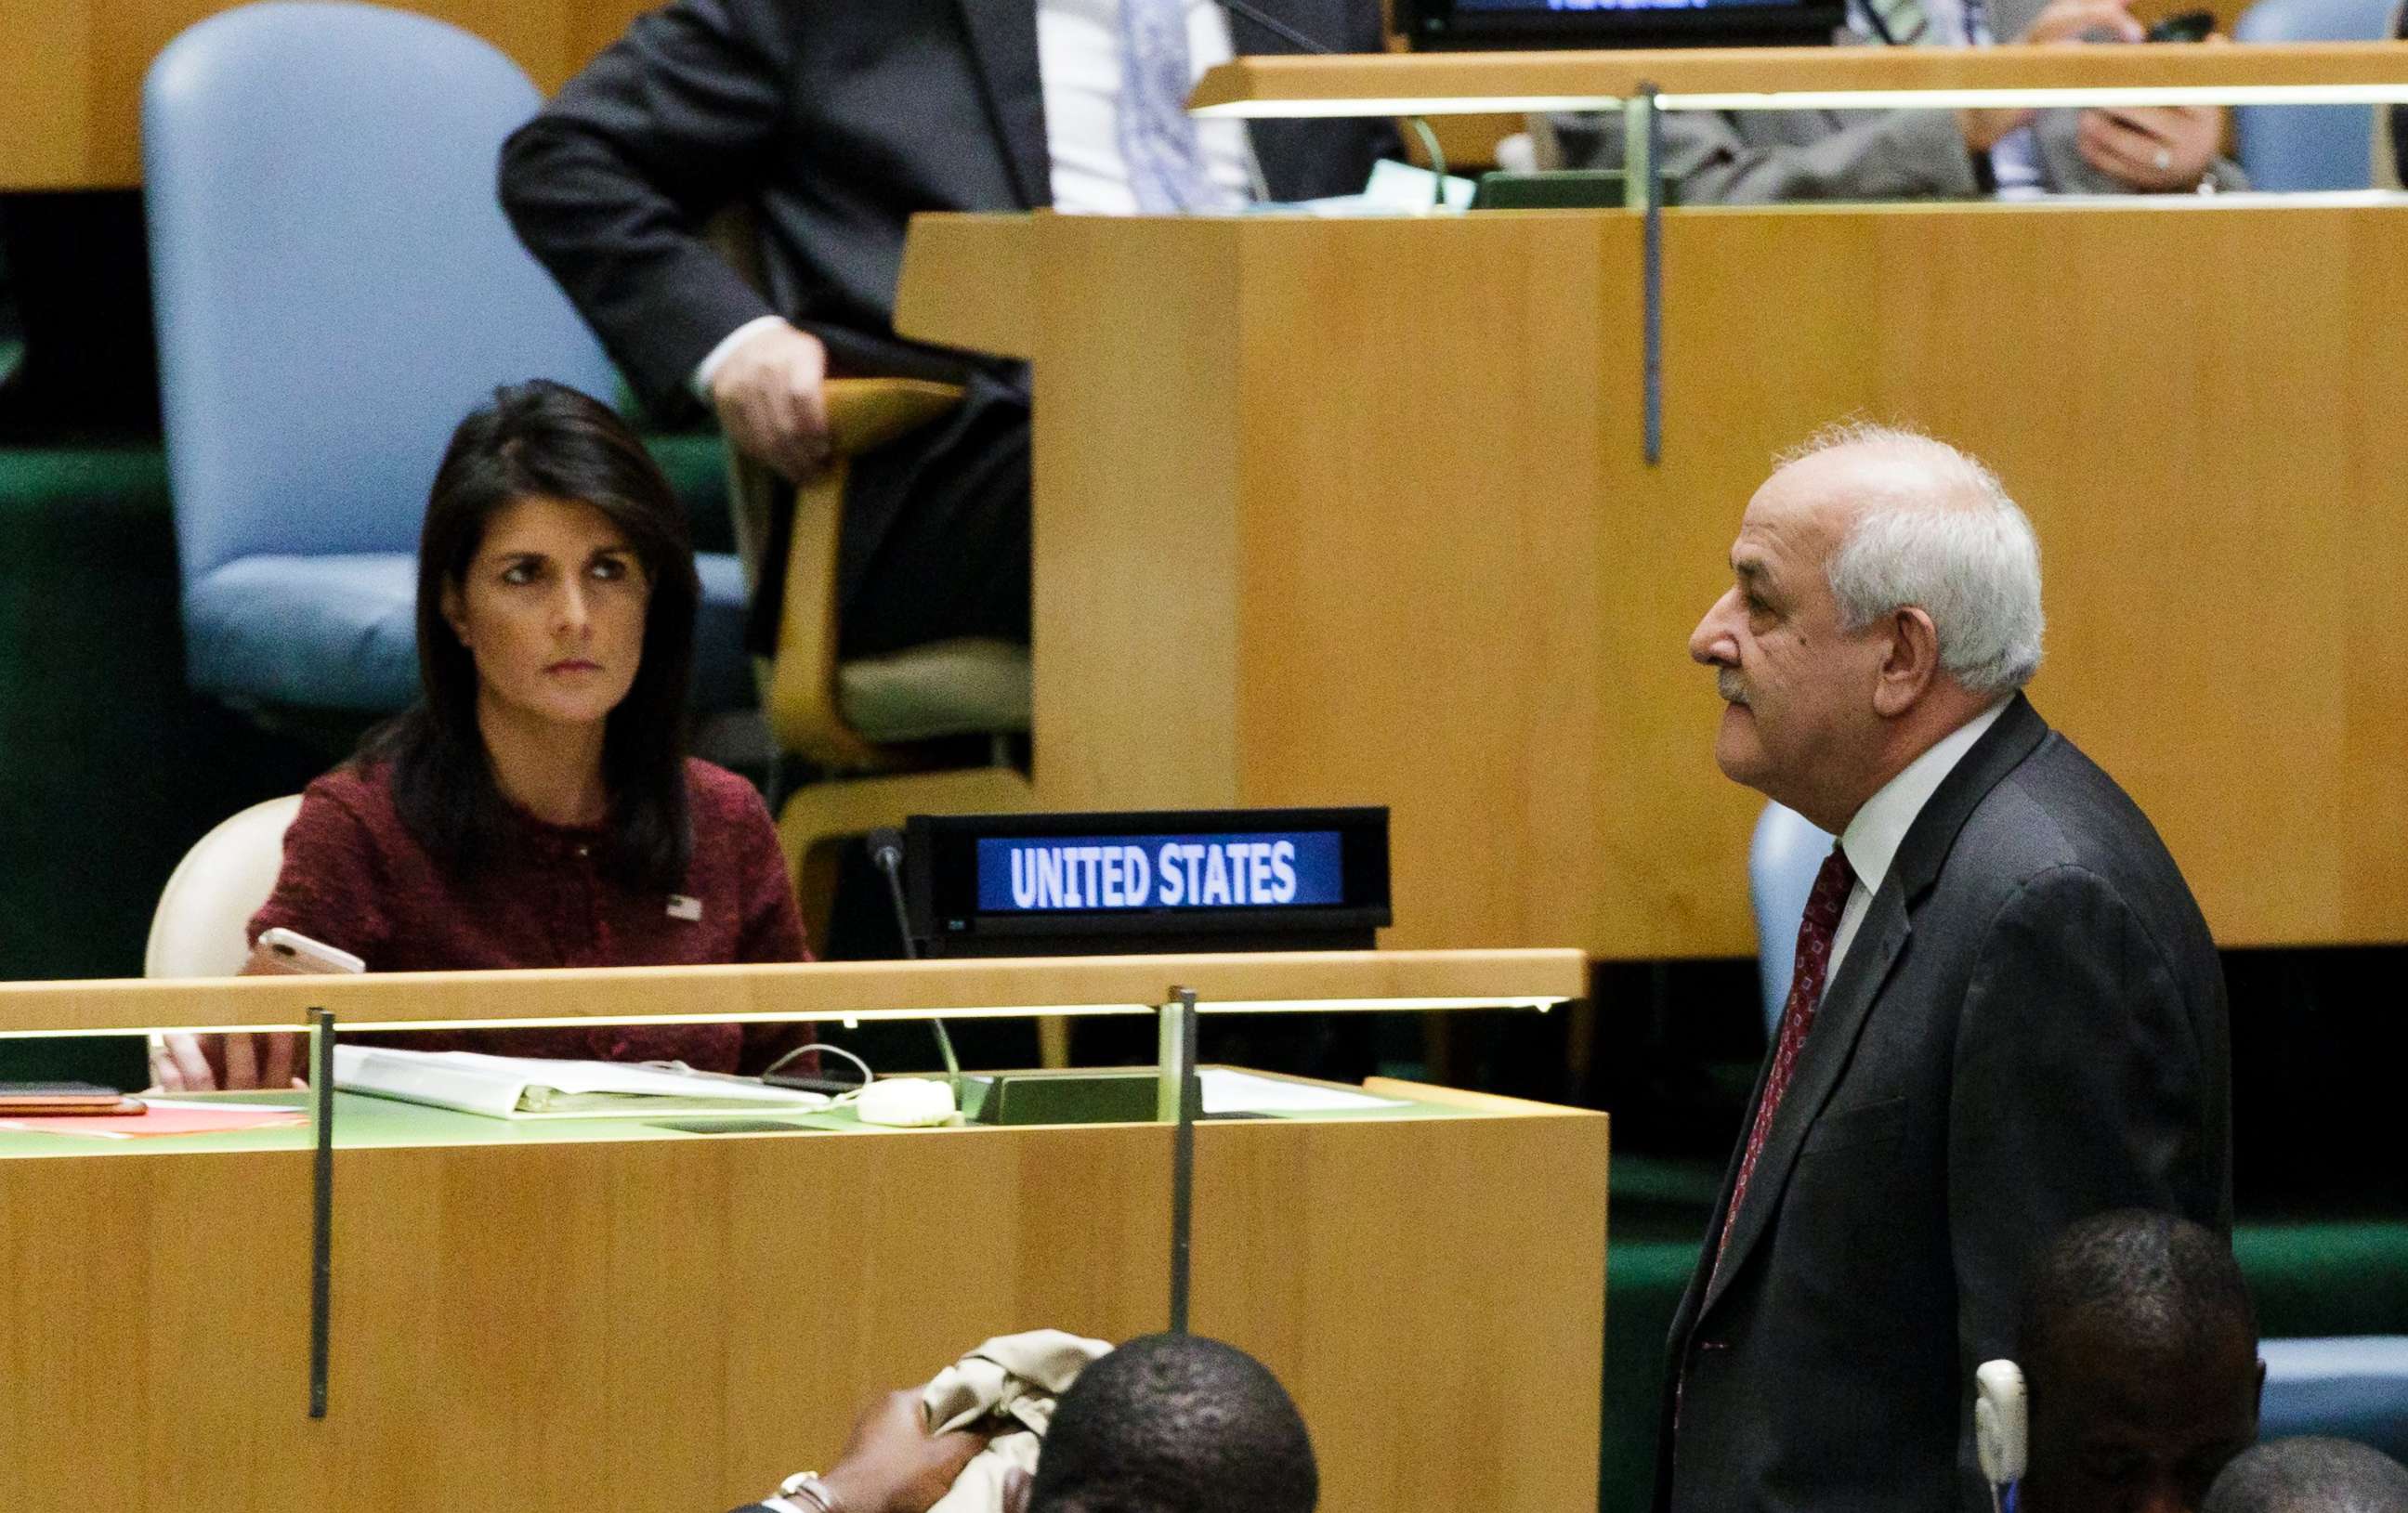 PHOTO: Riyad Mansour (R), Palestine's Permanent Observer to the United Nations, walks past U.S. Ambassador to the United Nations Nikki Haley (L), at the U.N. General Assembly, Dec. 21, 2017, at United Nations headquarters in New York.